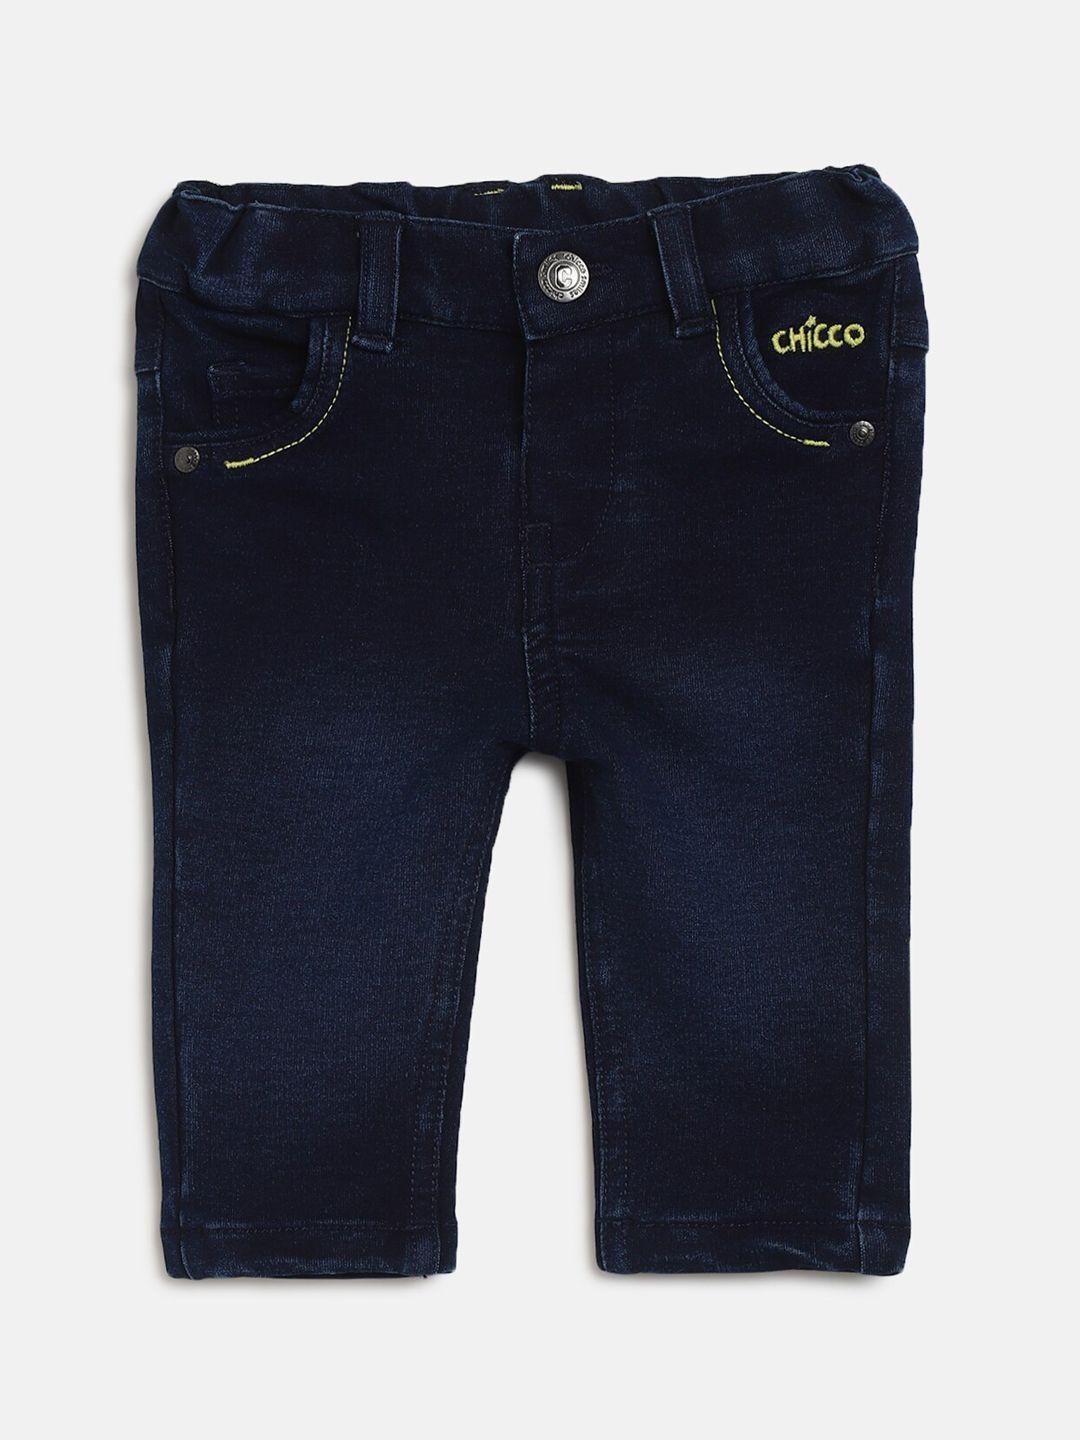 chicco boys jean stretchable cotton jeans